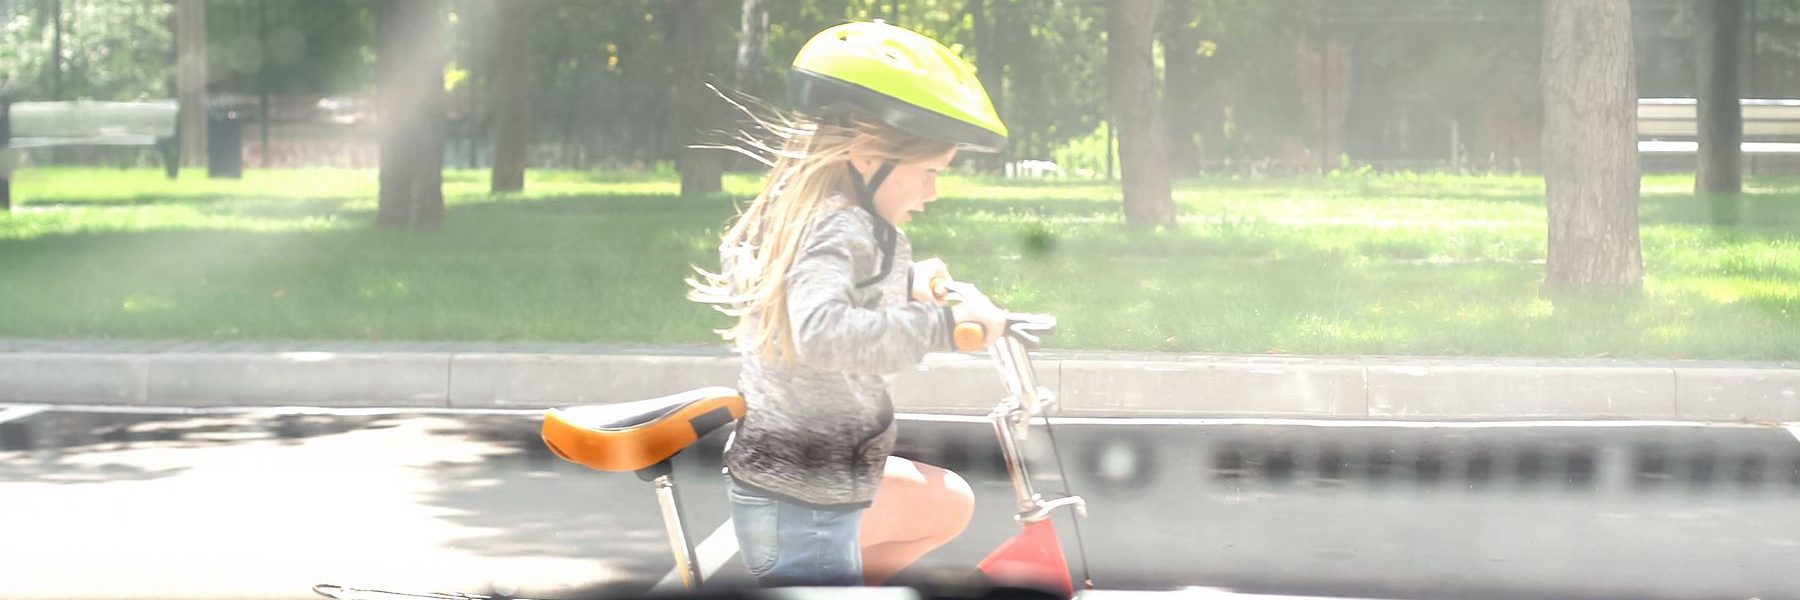 Bicycle Accidents Involving Children